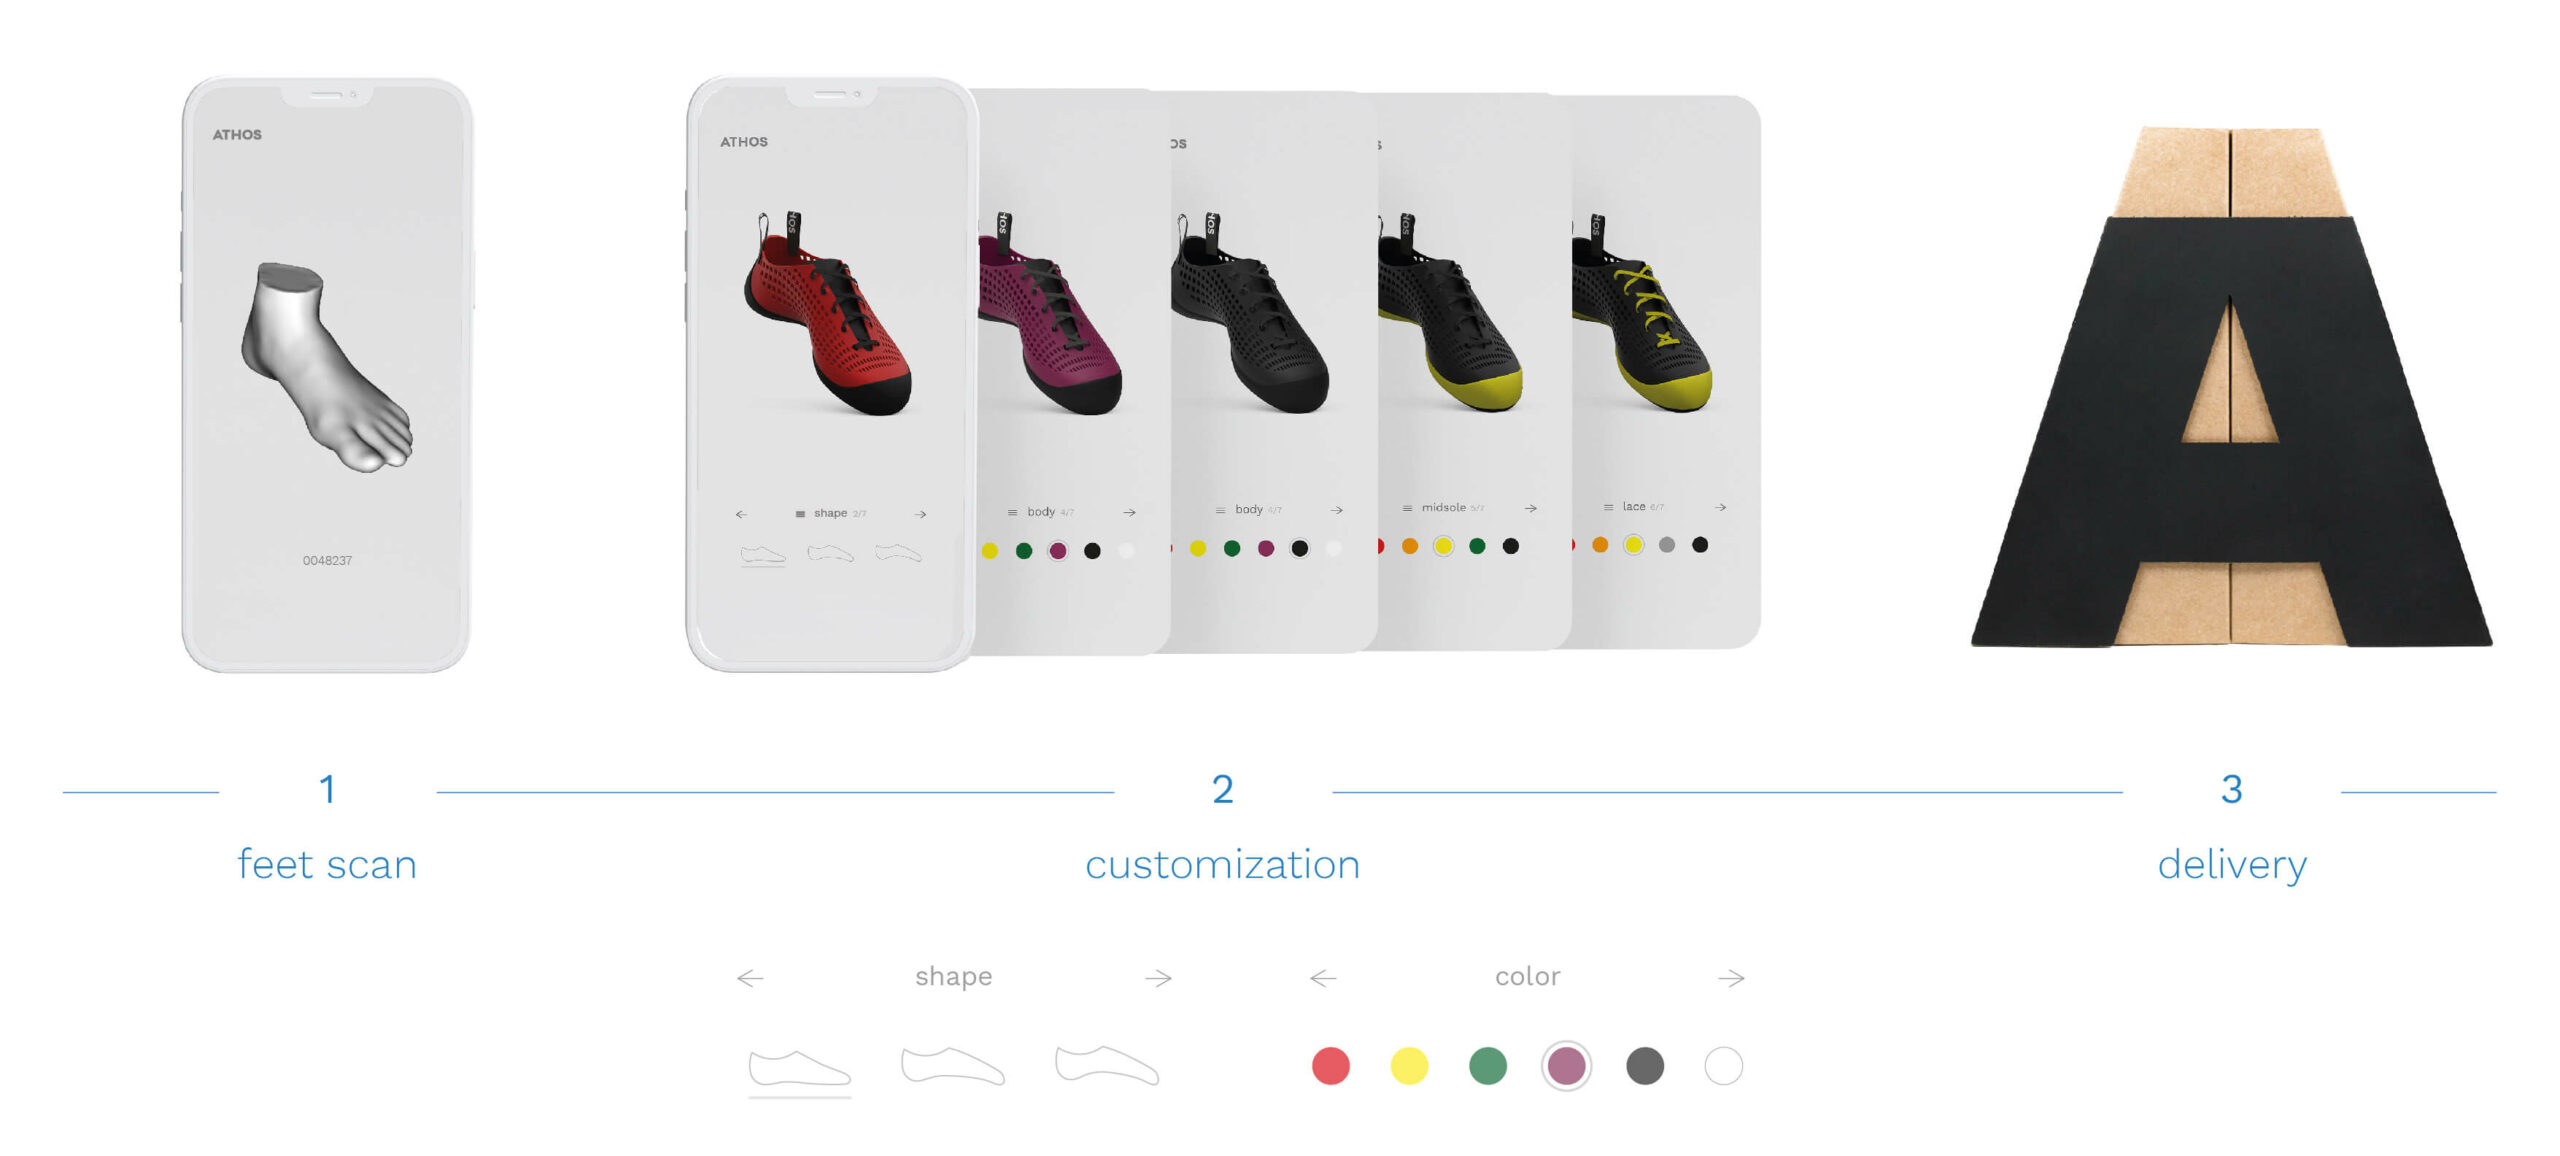 The process of shoe manufacturing from scan to package ready for shipment is shown in three steps: 1st foot scan, 2nd customization, representation of different shoe models in different colors with differently shaped soles, 3rd package with a capital 